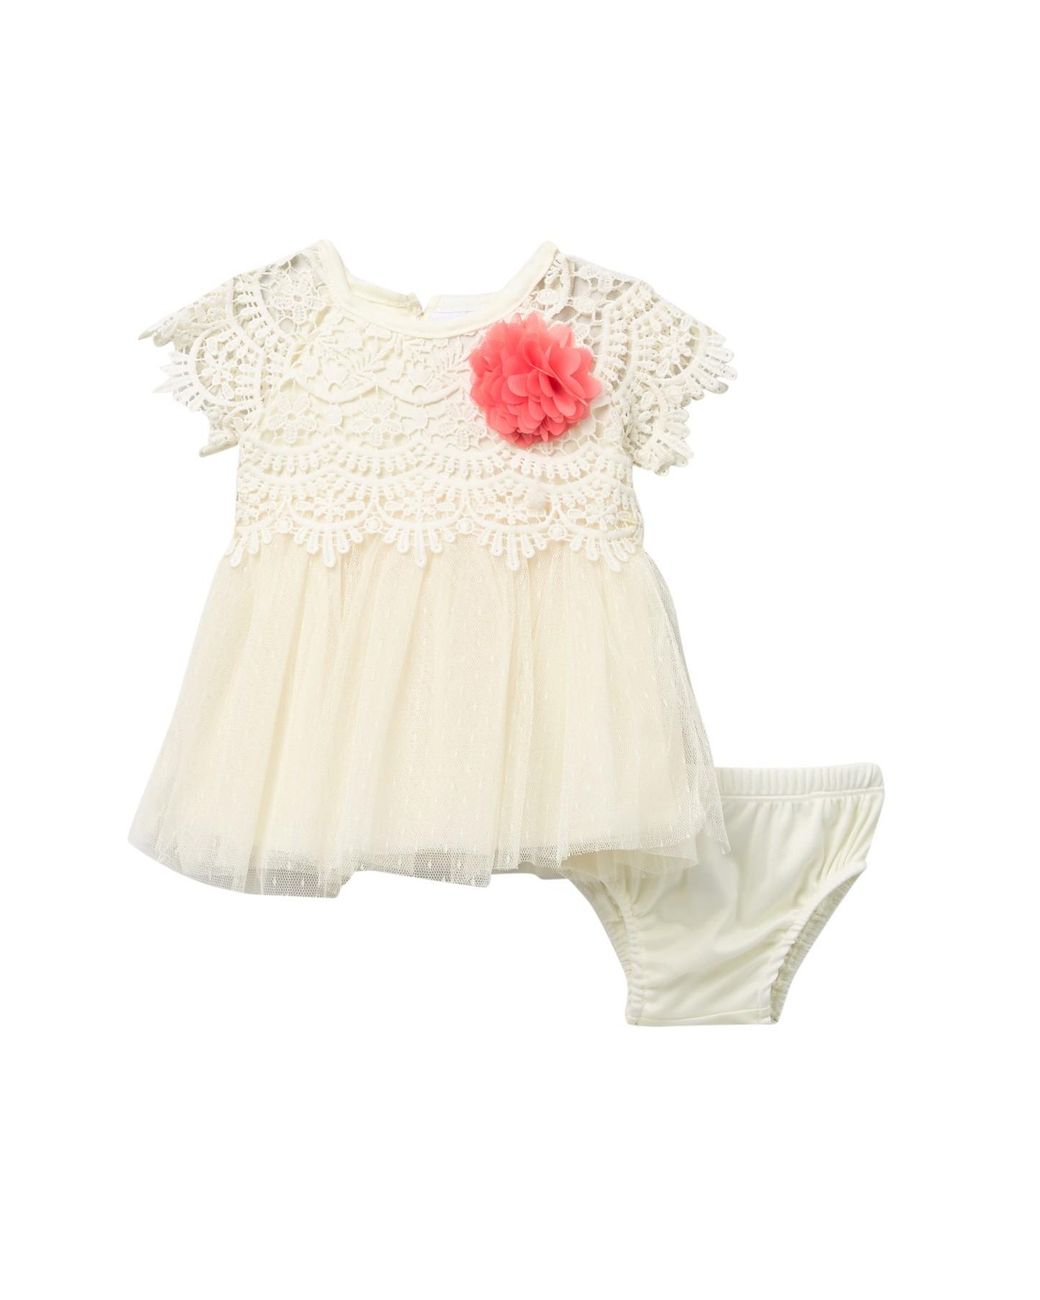 Lyst - Nicole Miller Lace Top 2-piece Dress Set (baby Girls 0-9m) in White